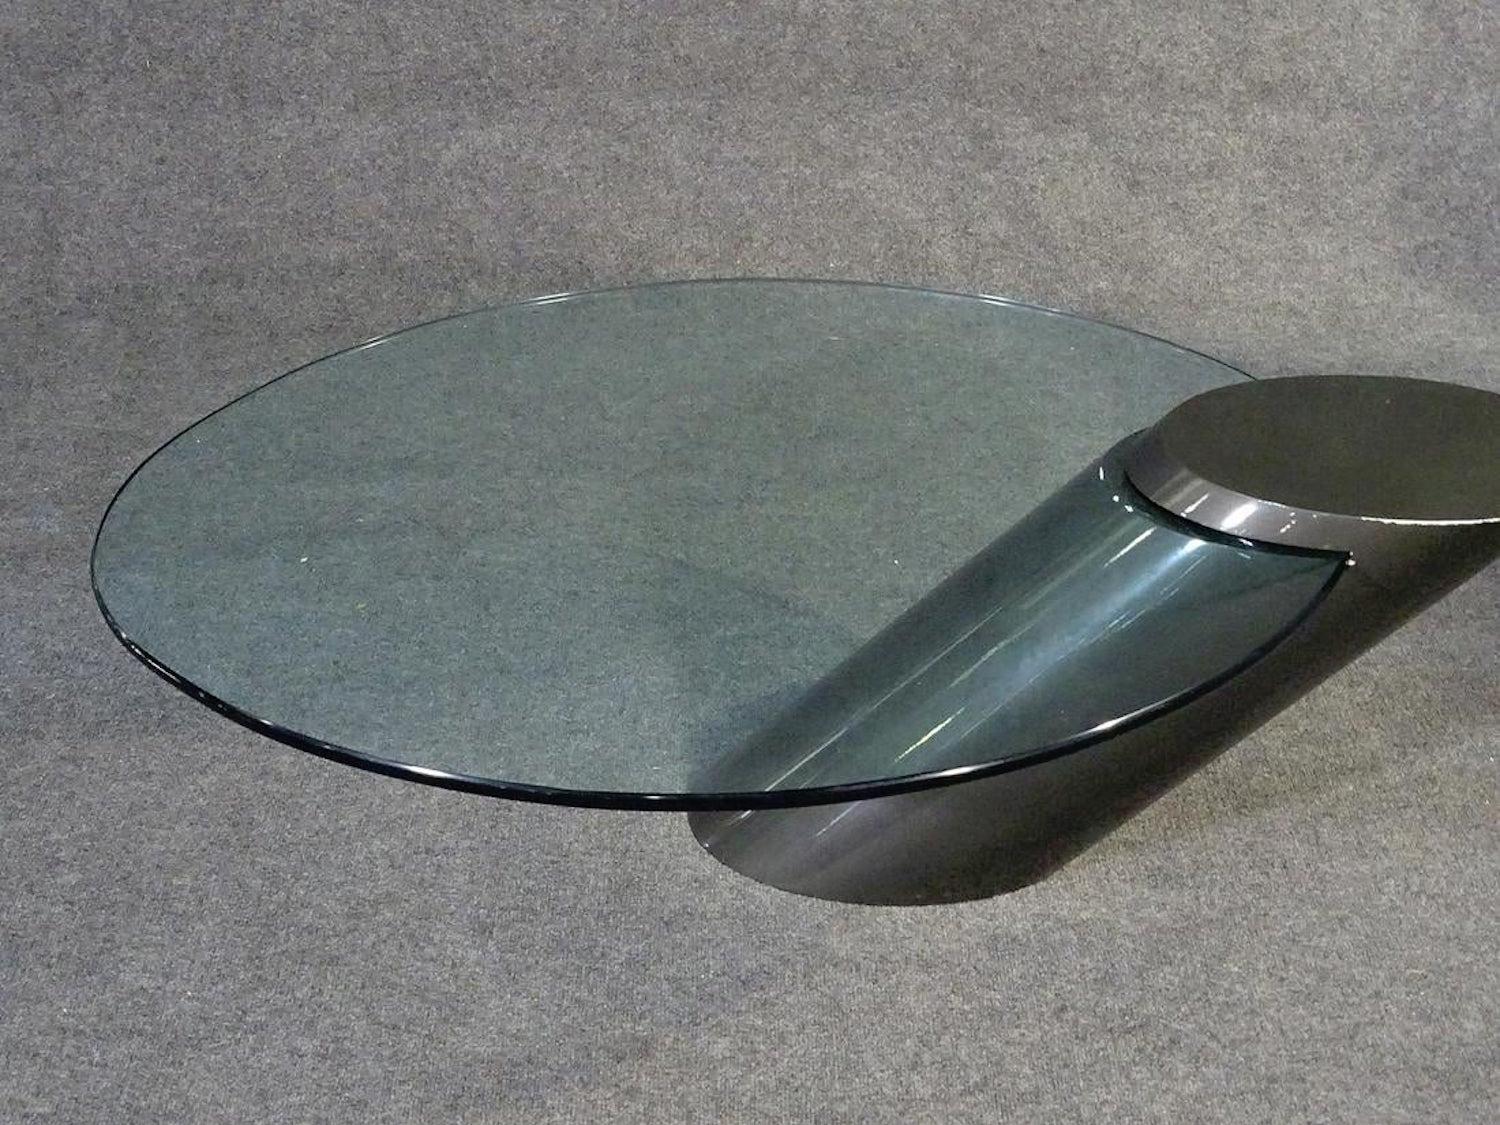 Oval glass set into a lacquered angled base. Designed by J. Wade Beam for Brueton.
(Please confirm item location - NY or NJ - with dealer).
  